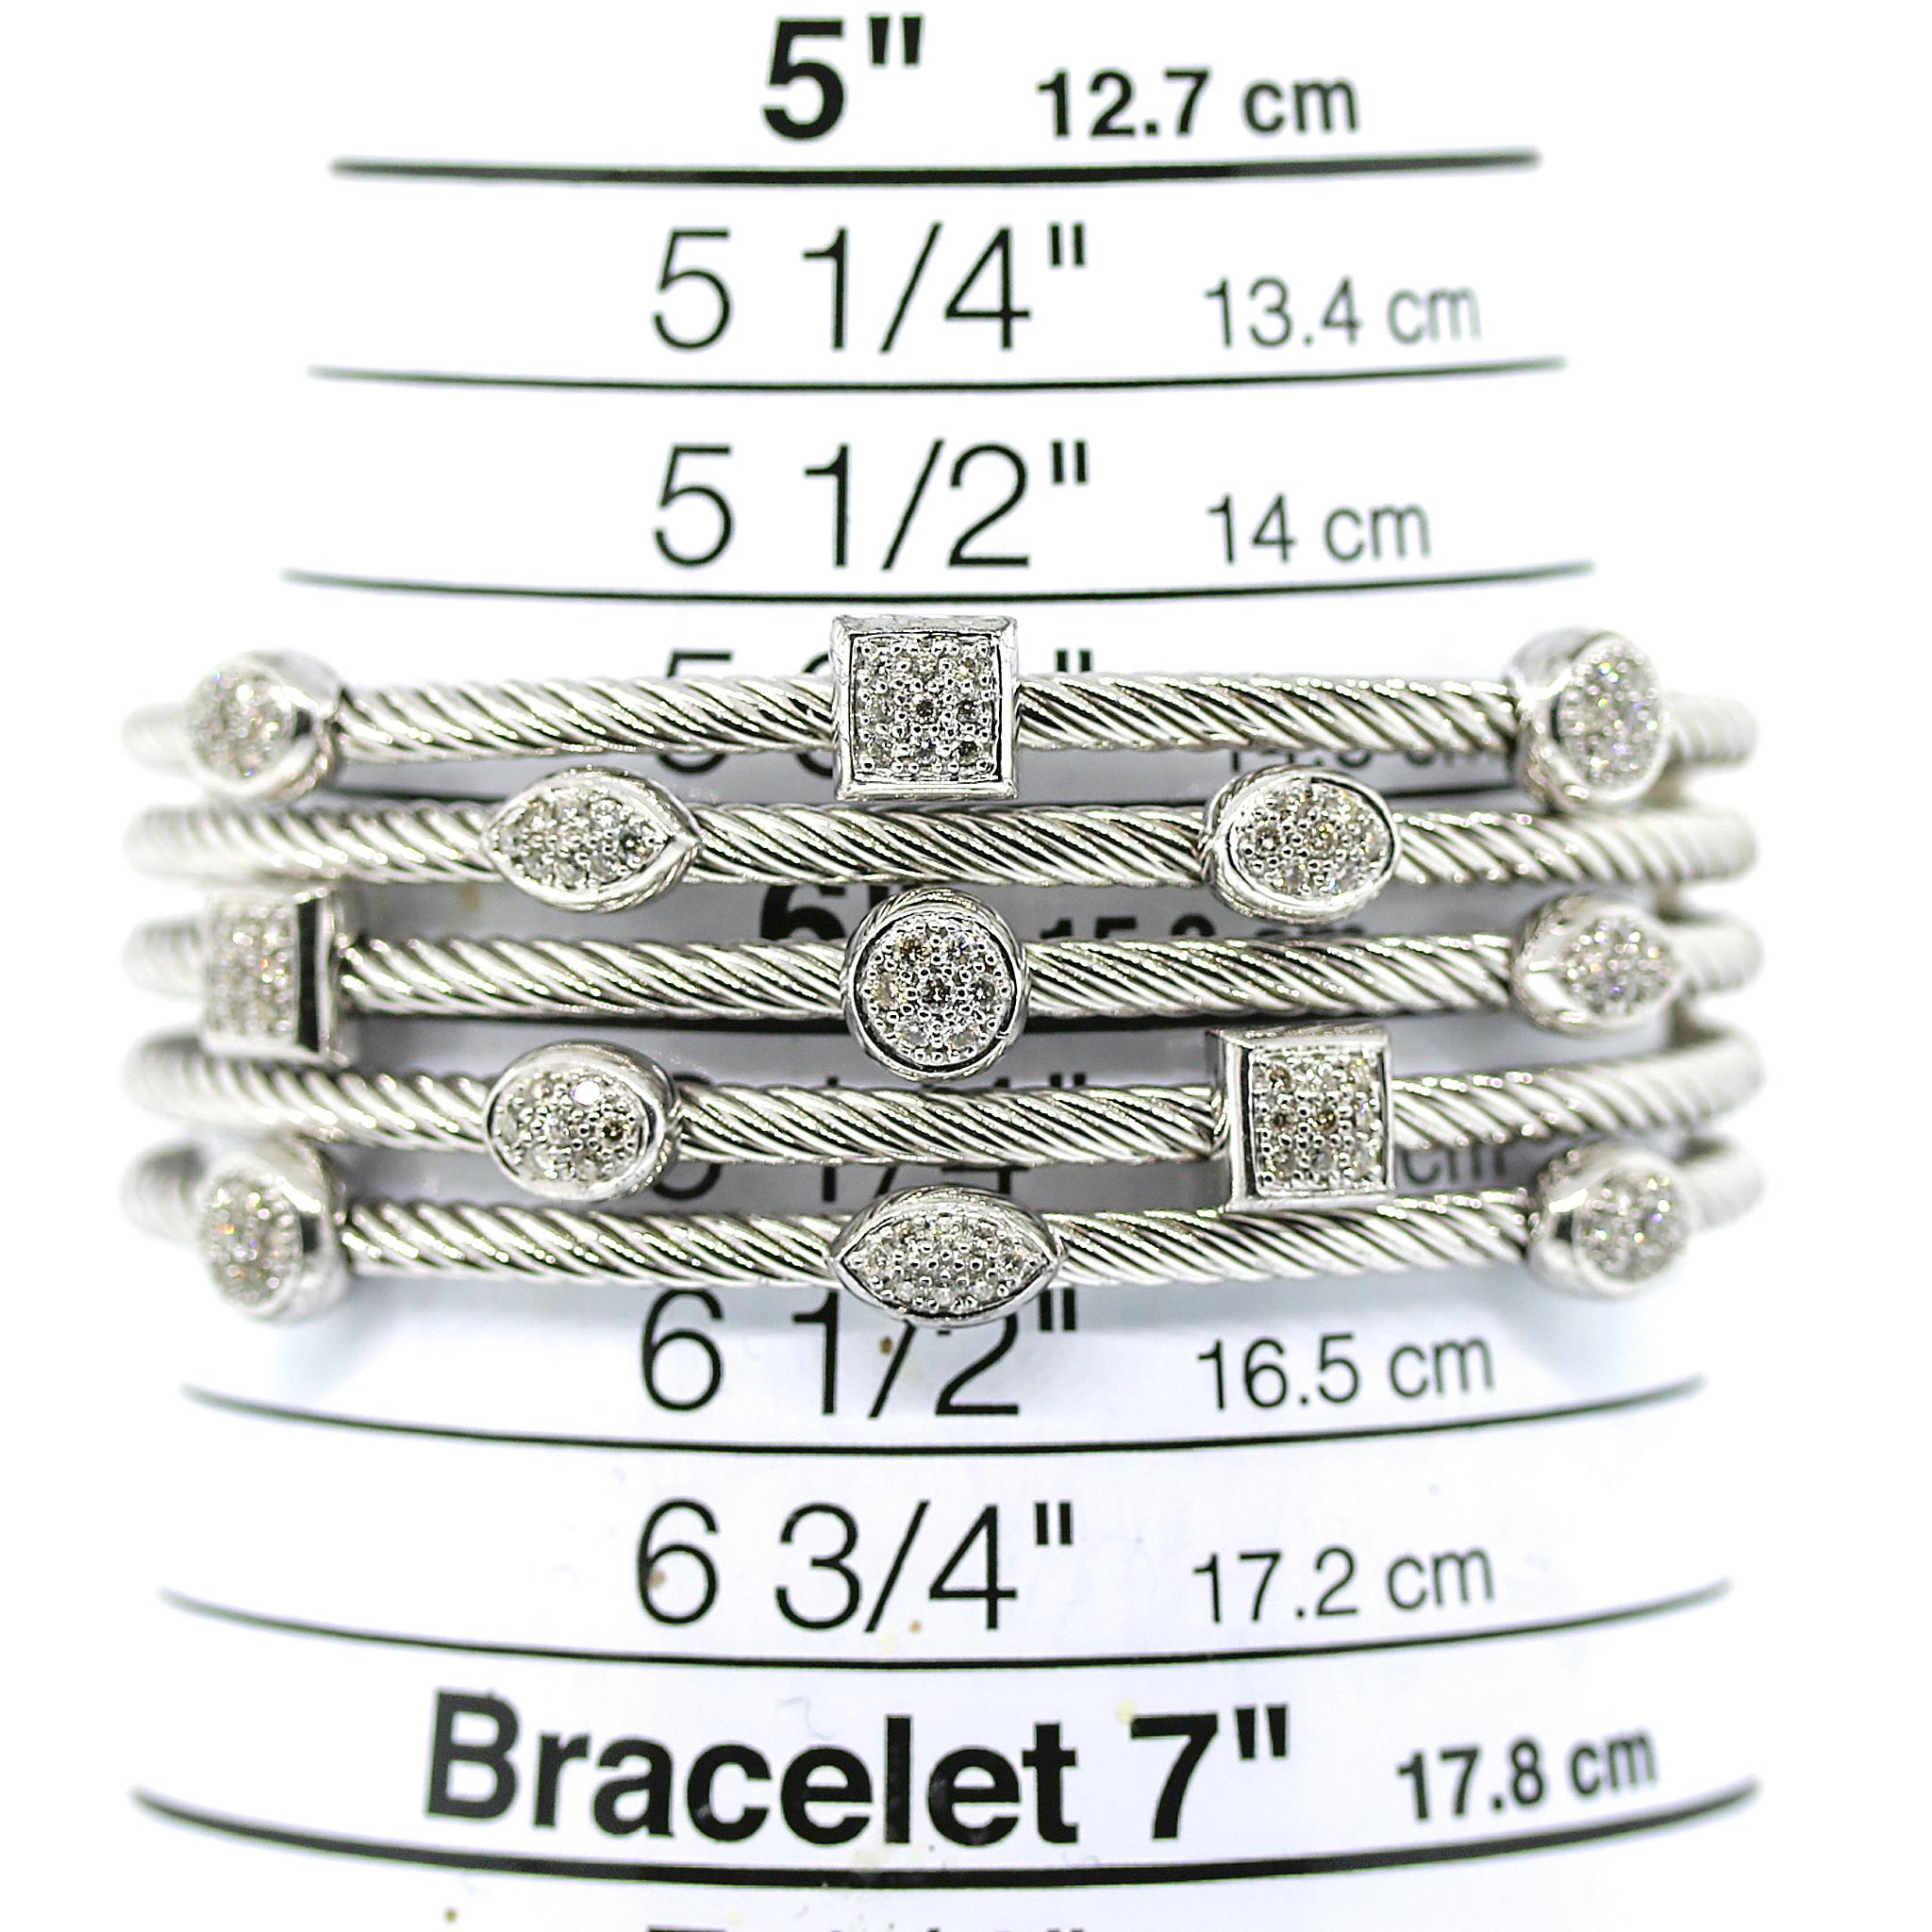 Sterling Silver
Five sterling silver cable bands, each containing facets of pave diamonds
Can fit wrists up to 6.5 inches